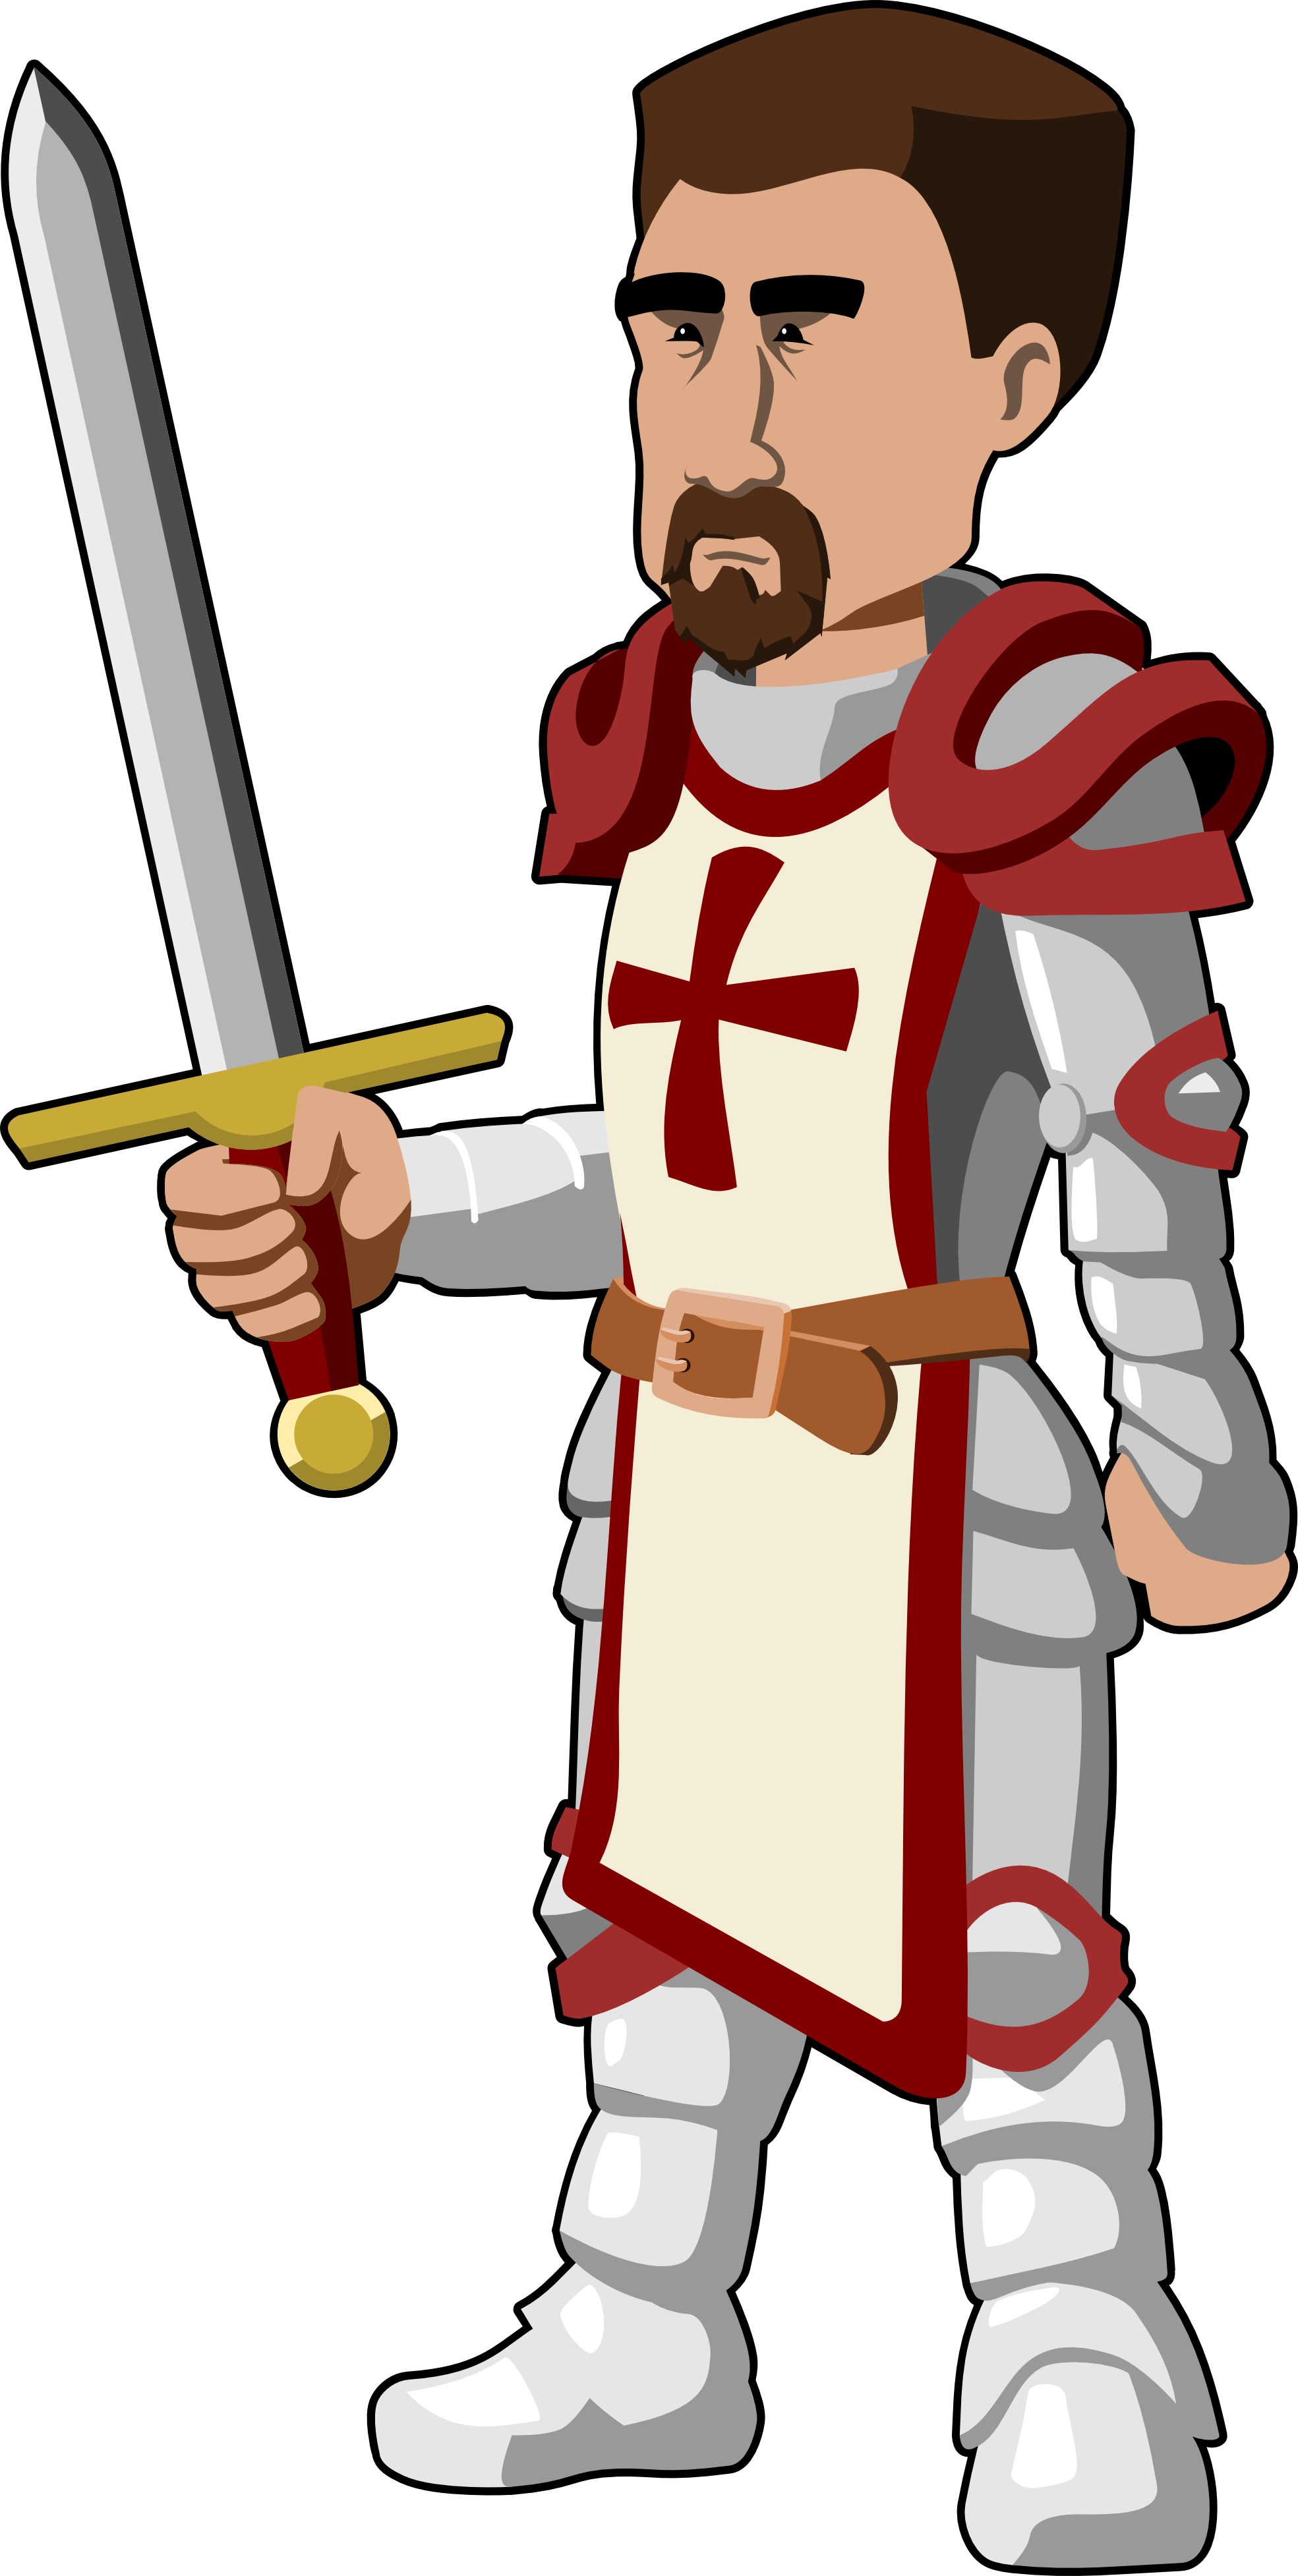 Knight clip art in vector or format free 4